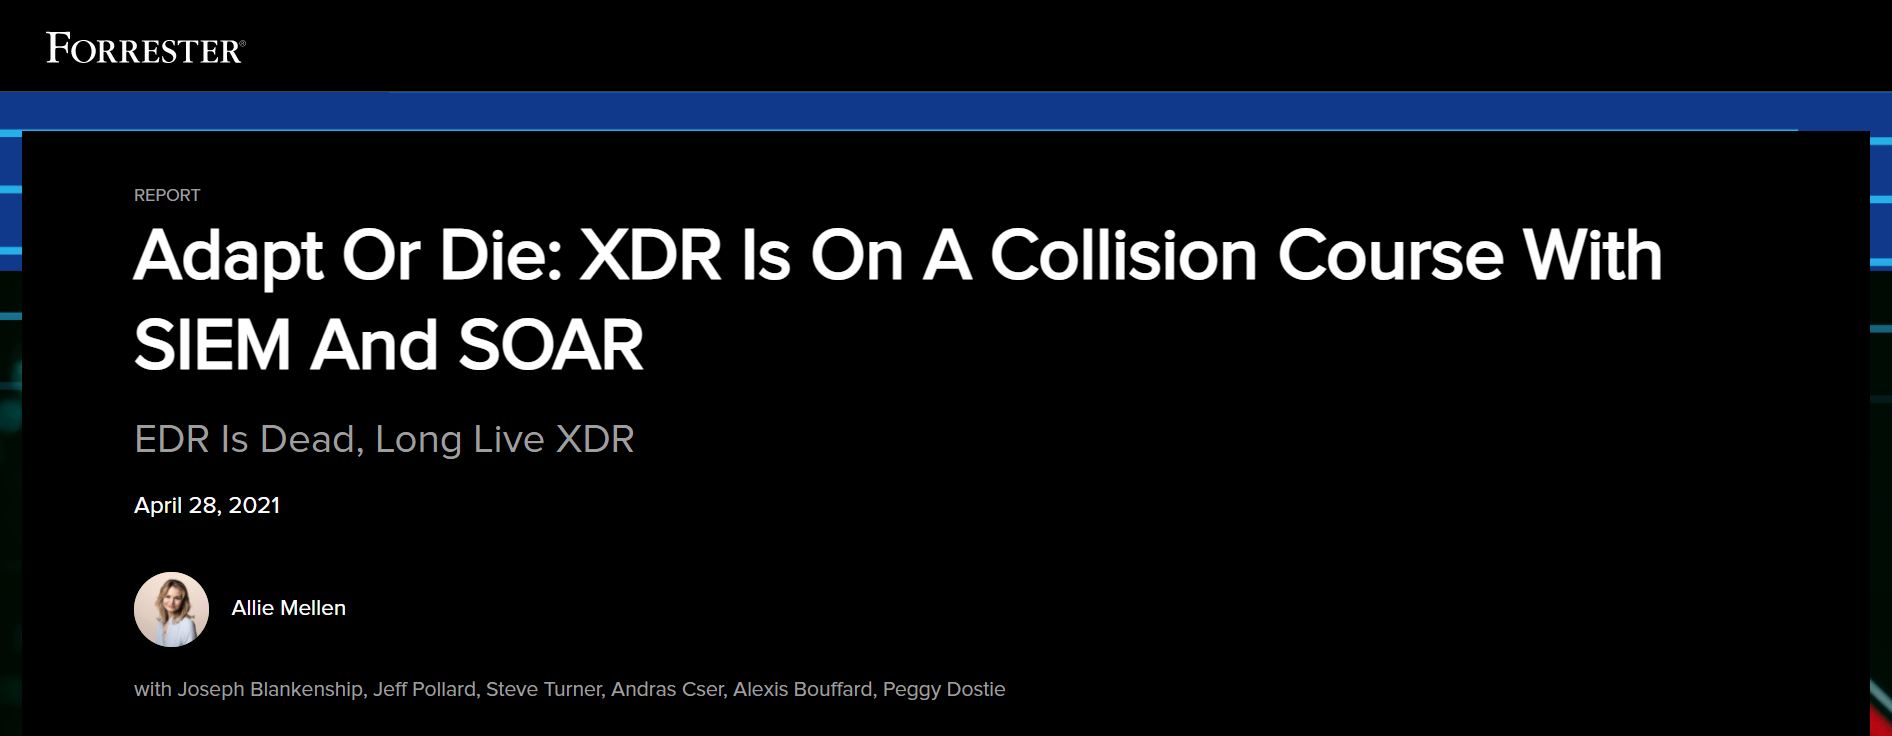 Adapt or Die: XDR Is On A Collision Course With SIEM And SOAR